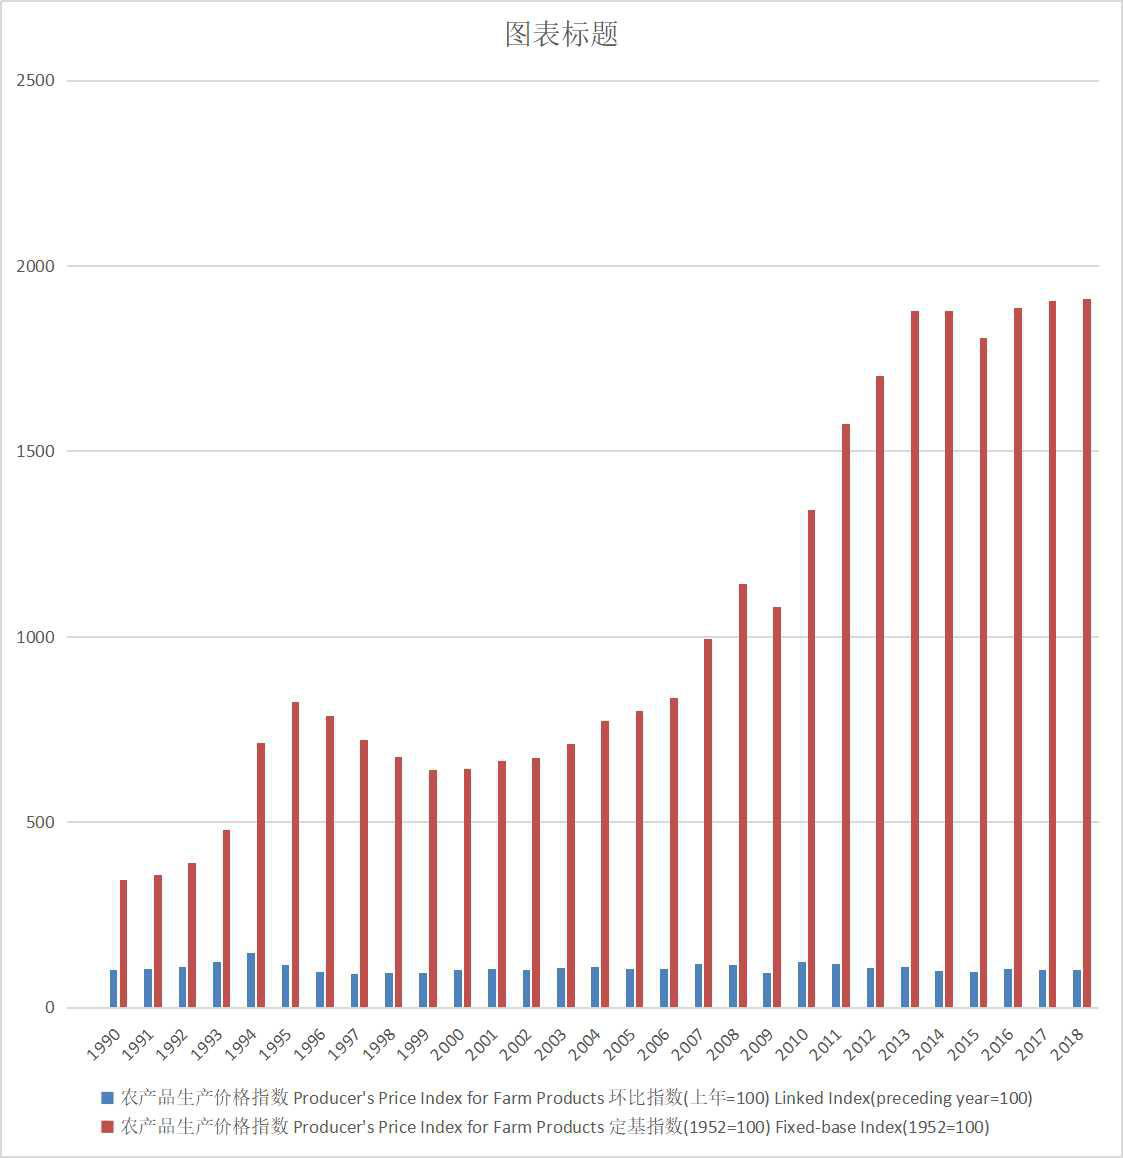 Total index of agricultural product production price in Main Years of Qinghai Province (1952-2018)